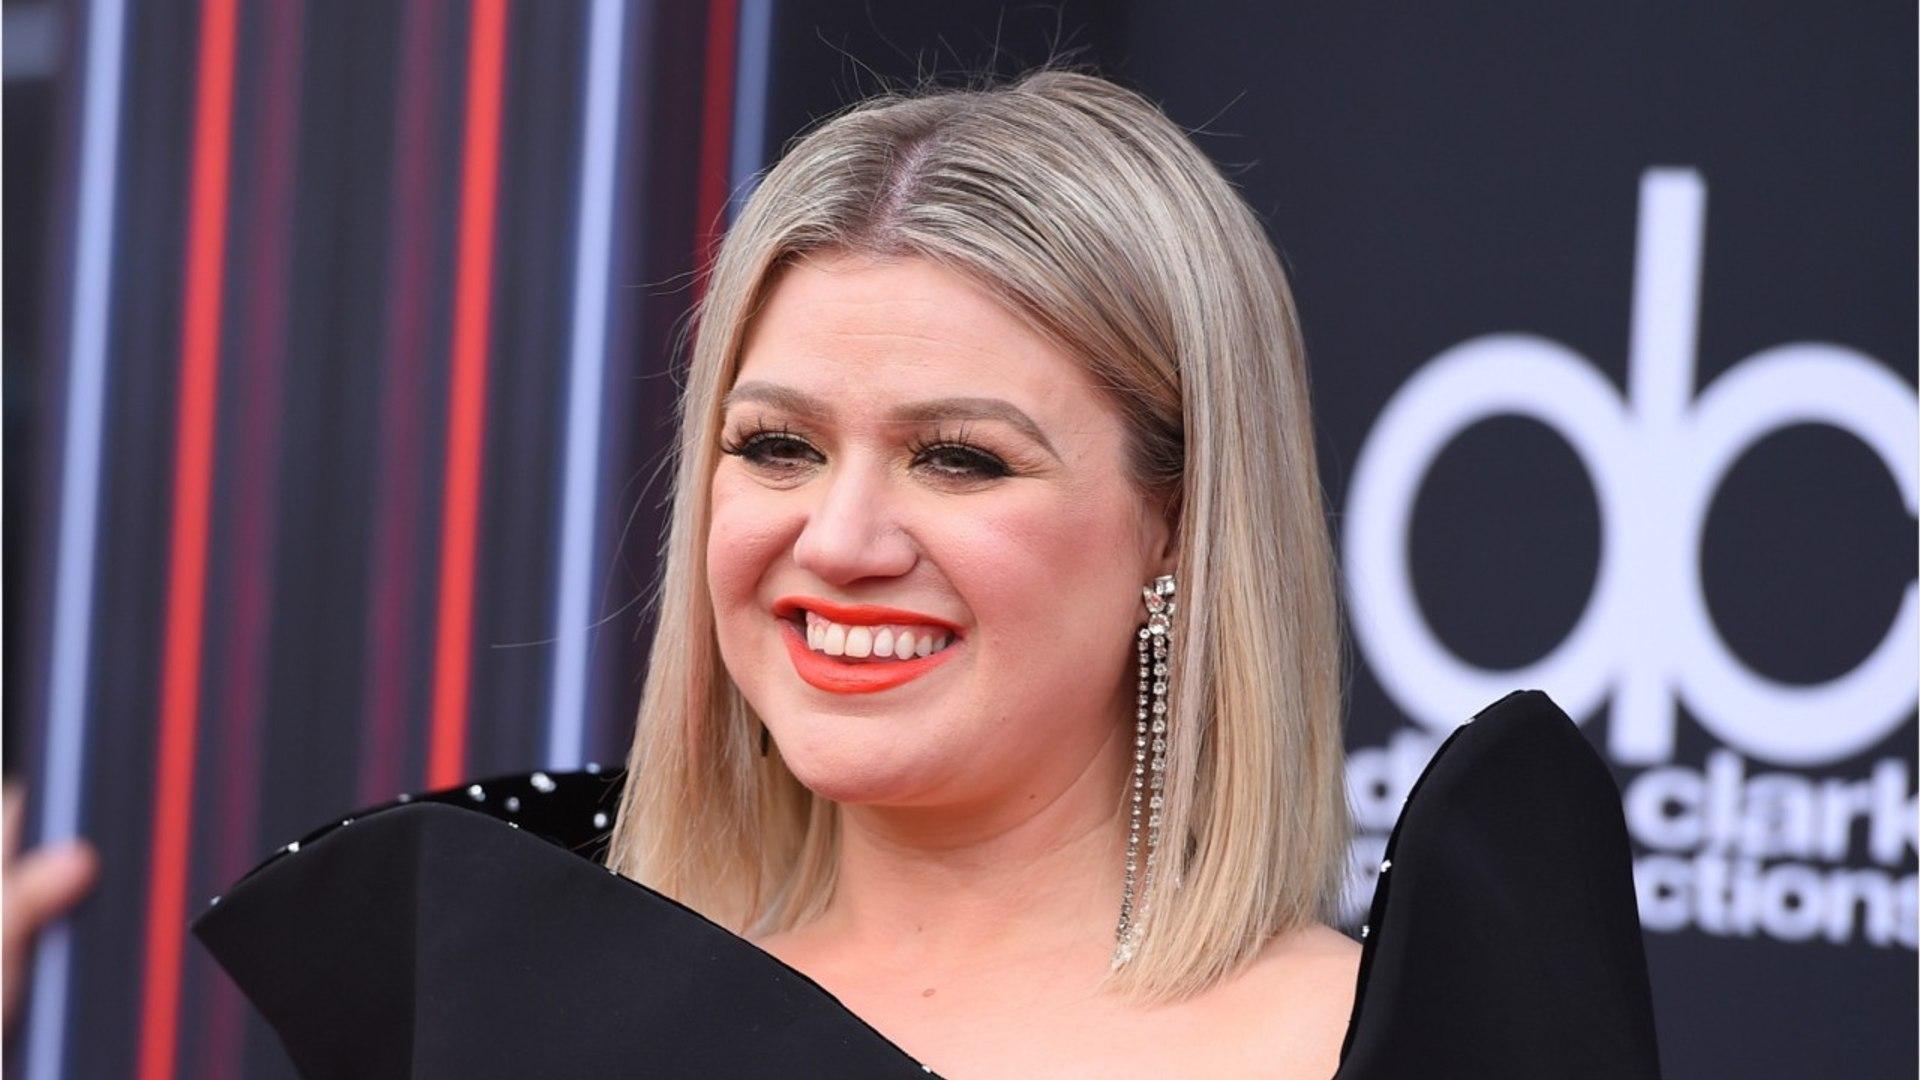 Kelly Clarkson 2019 Wallpapers - Wallpaper Cave